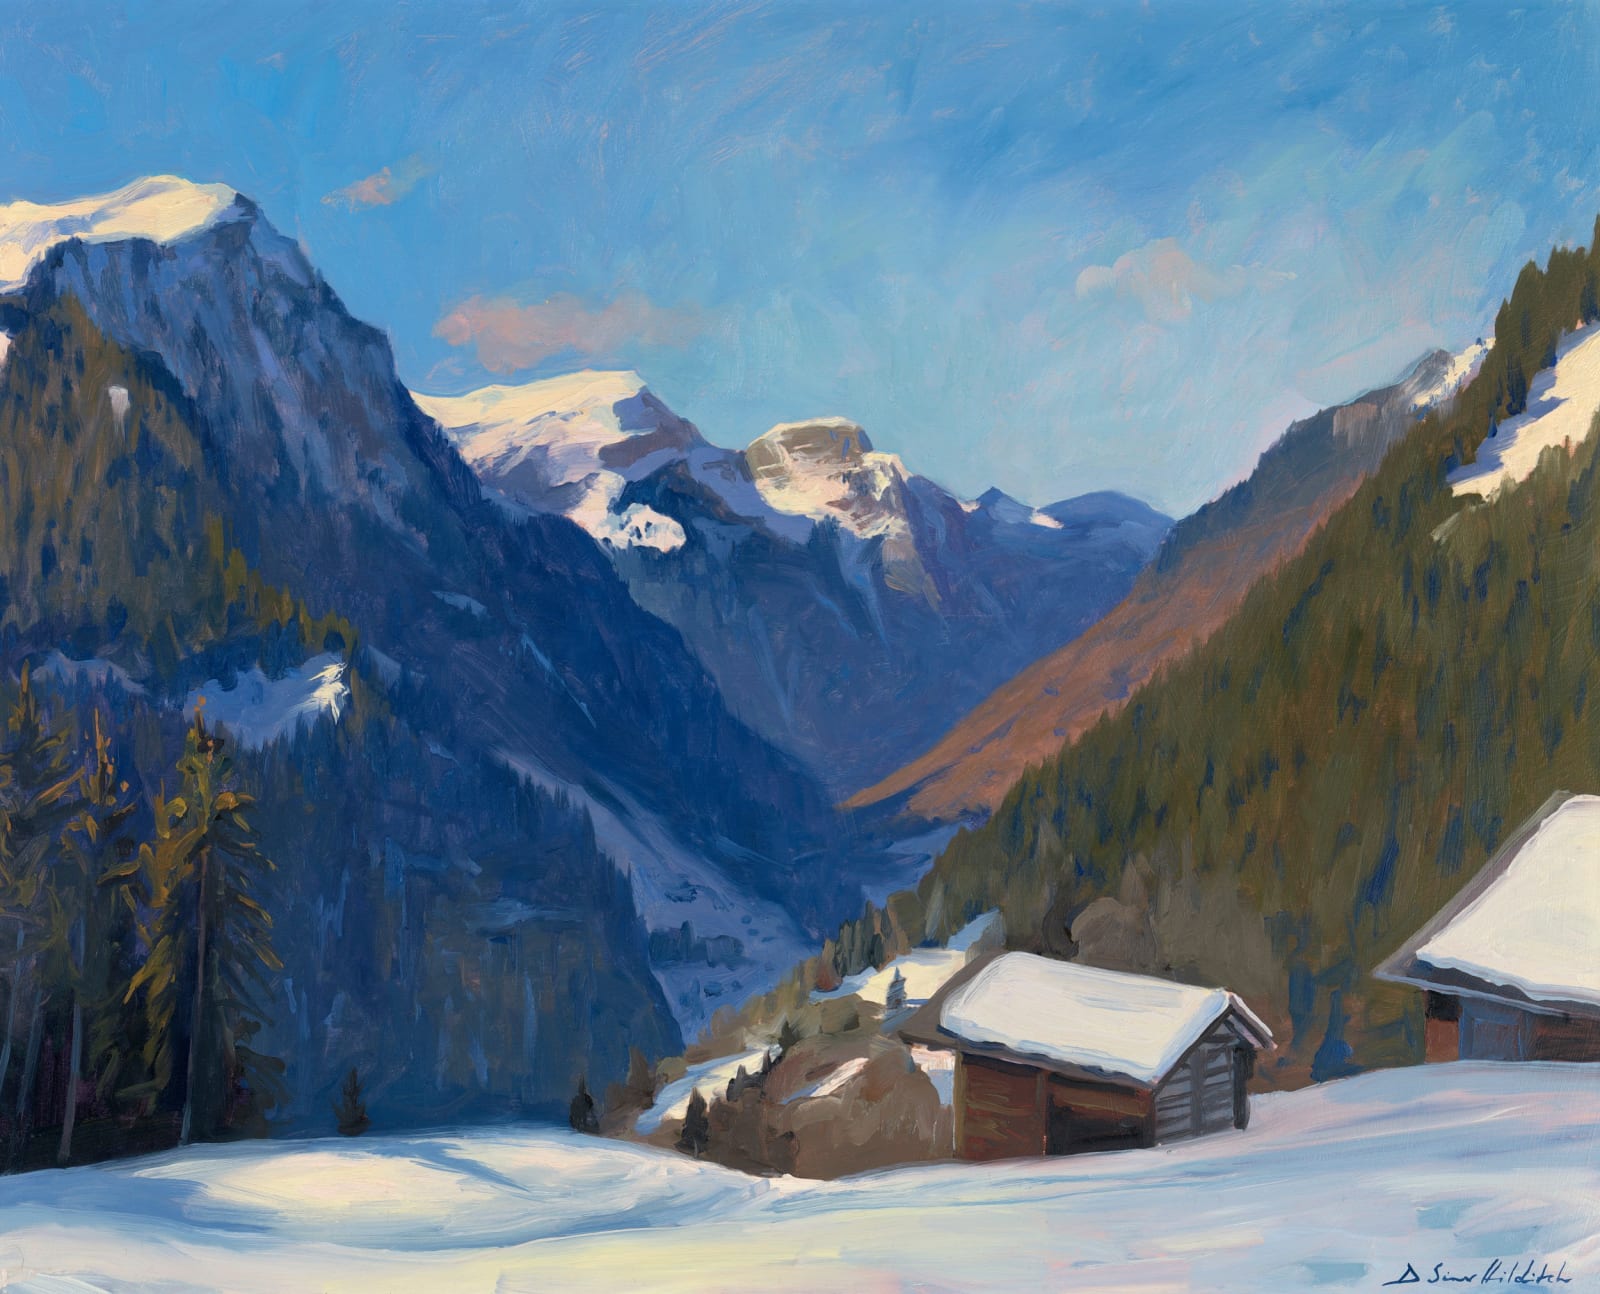 Daisy Sims Hilditch, Distant blues in Grindelwald valley, 2023